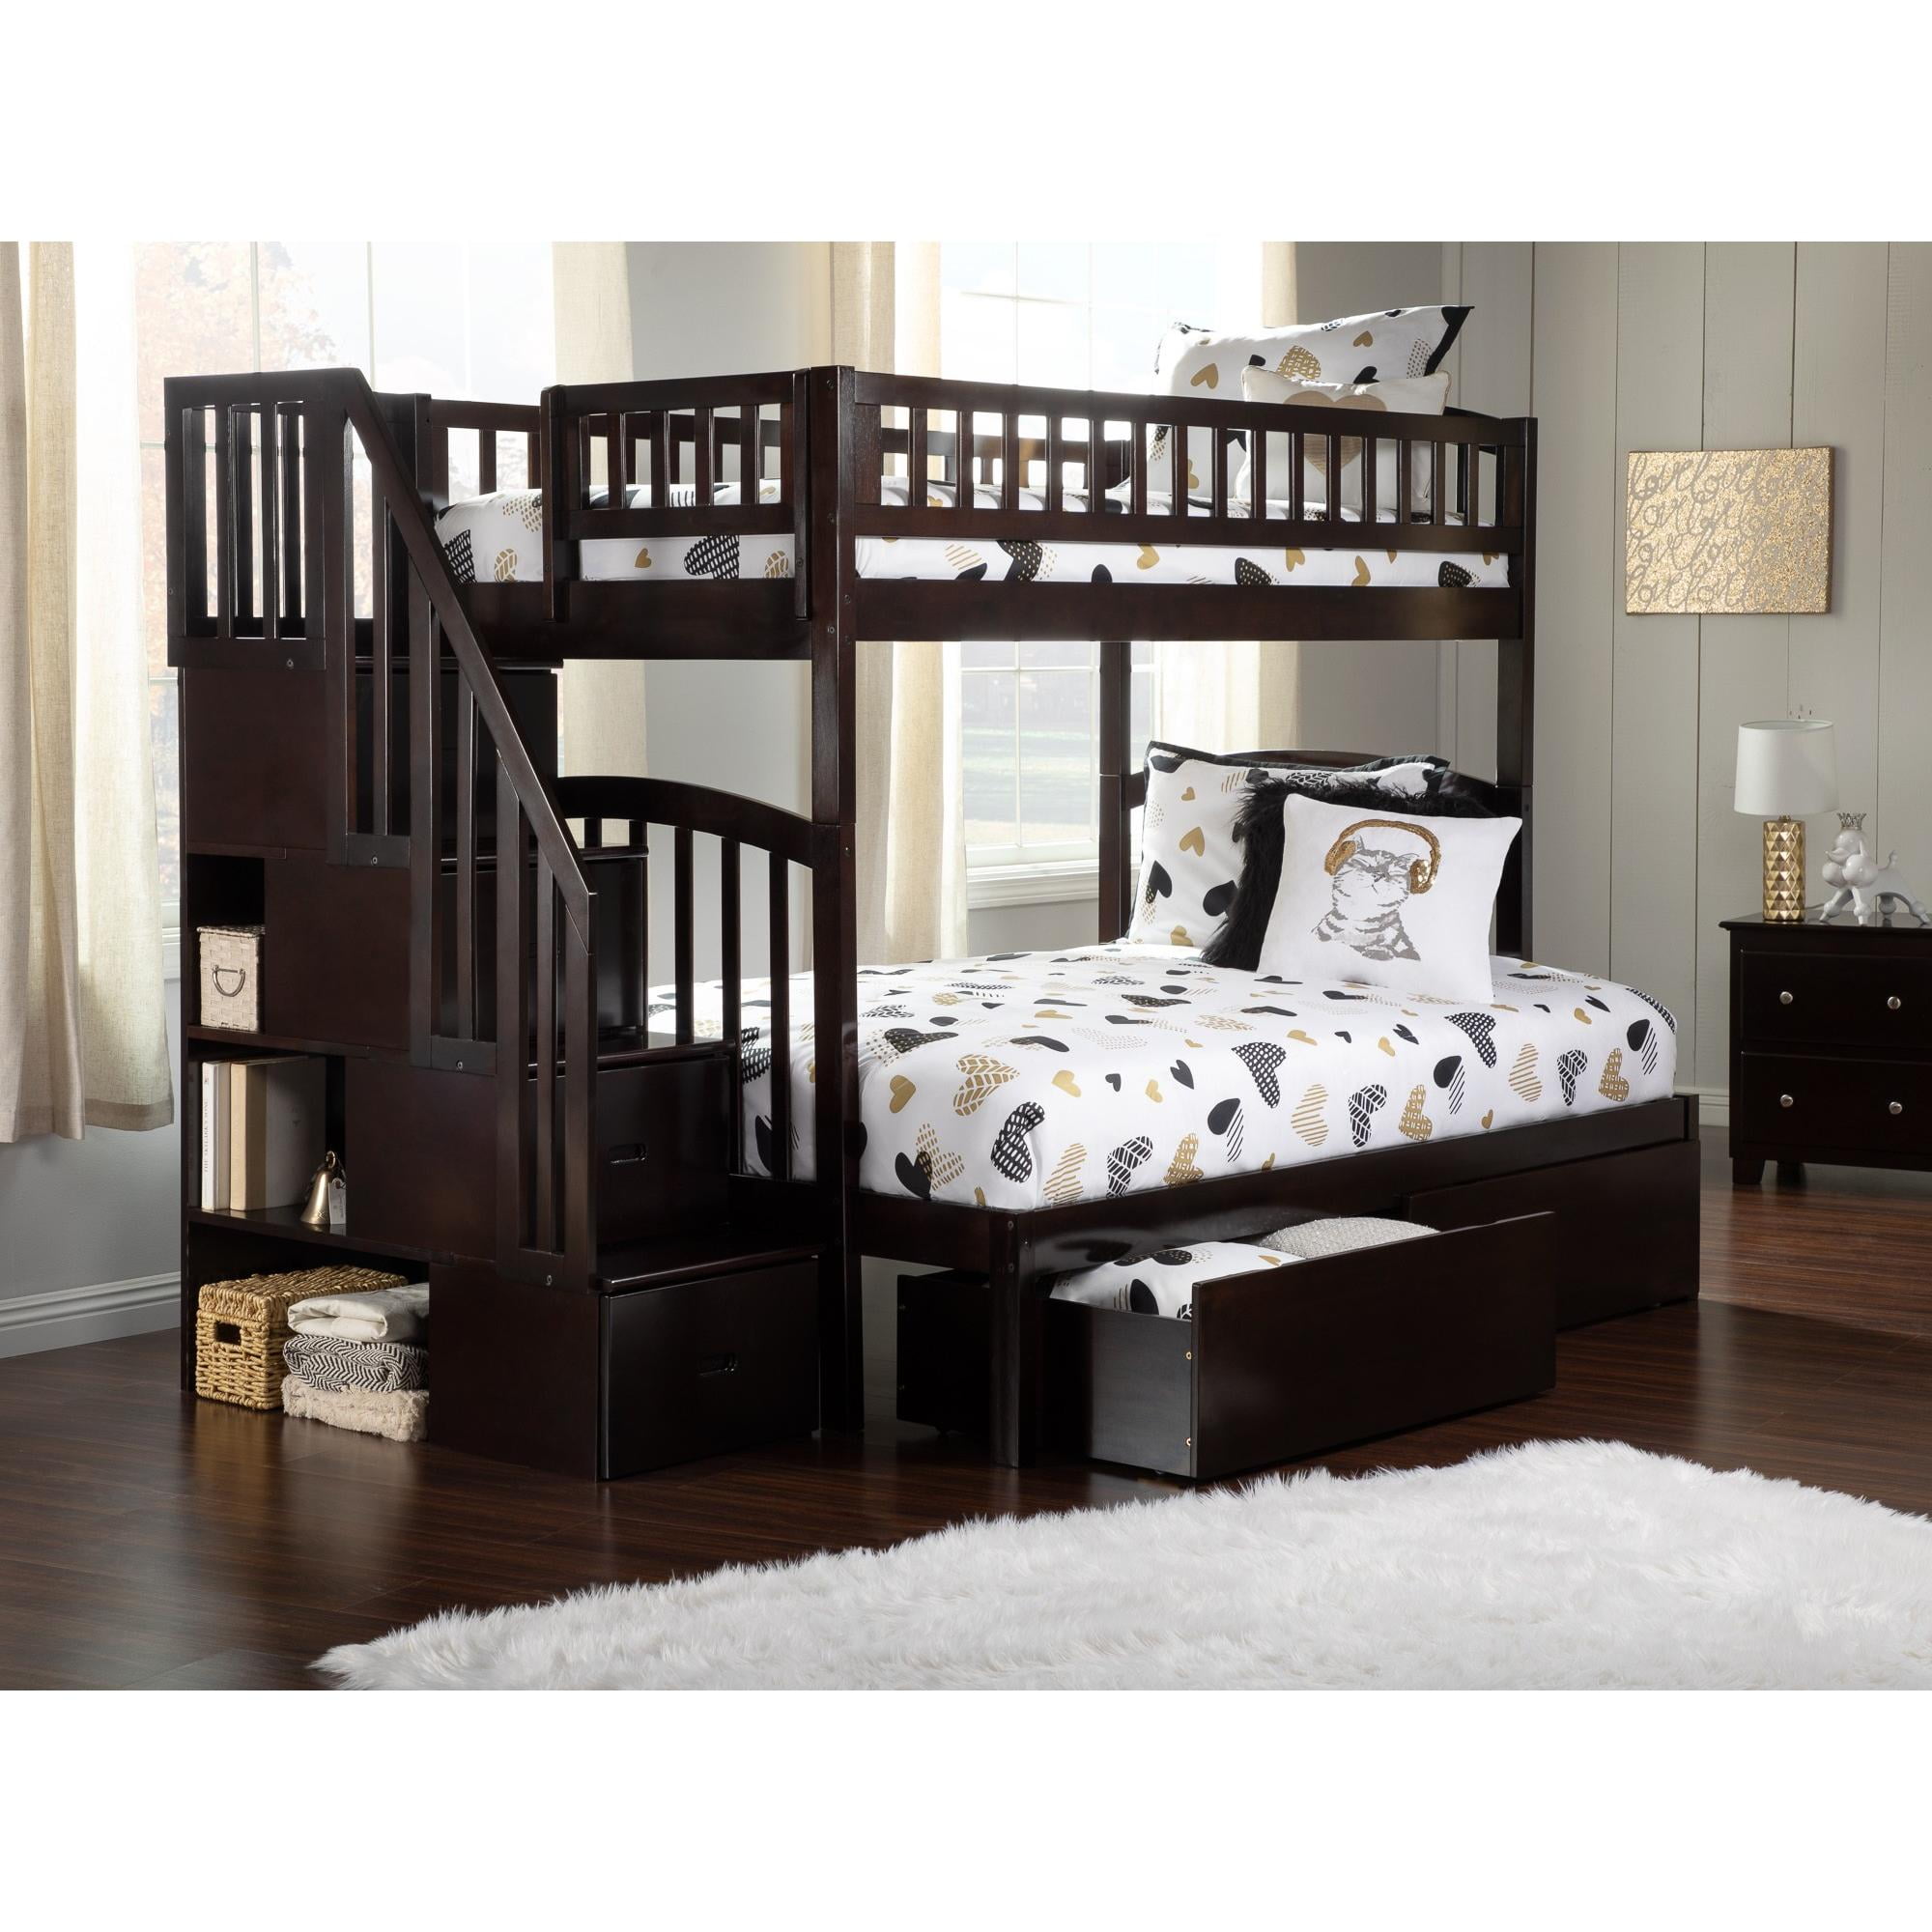 Ab65741 Westbrook Staircase Twin Over Full Bunk Bed With 2 Urban Drawers, Espresso